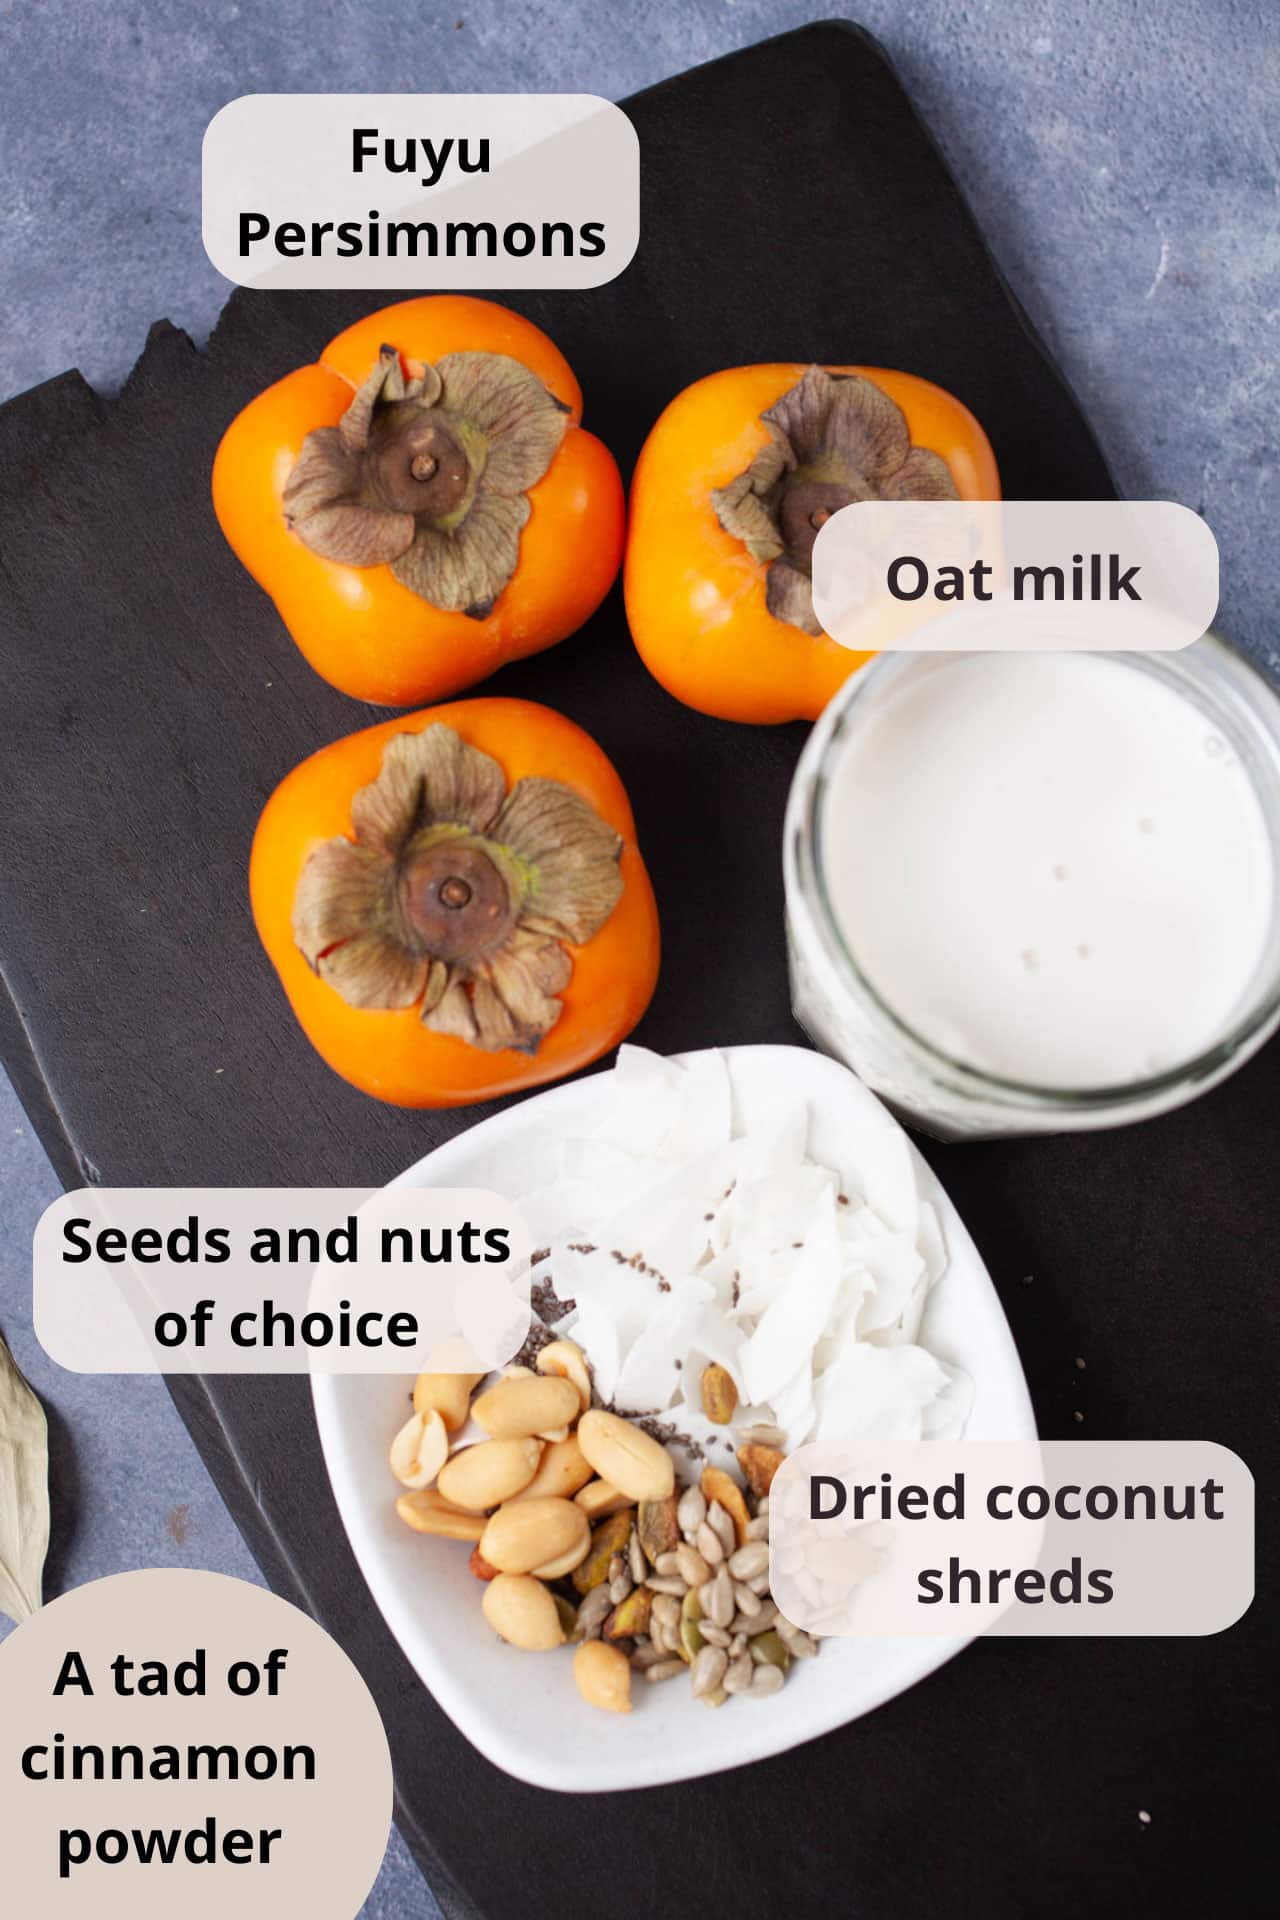 Ingredients like Fuyu persimmons, oat milk, dried coconut shreds, seeds and nuts displayed on a serving board.